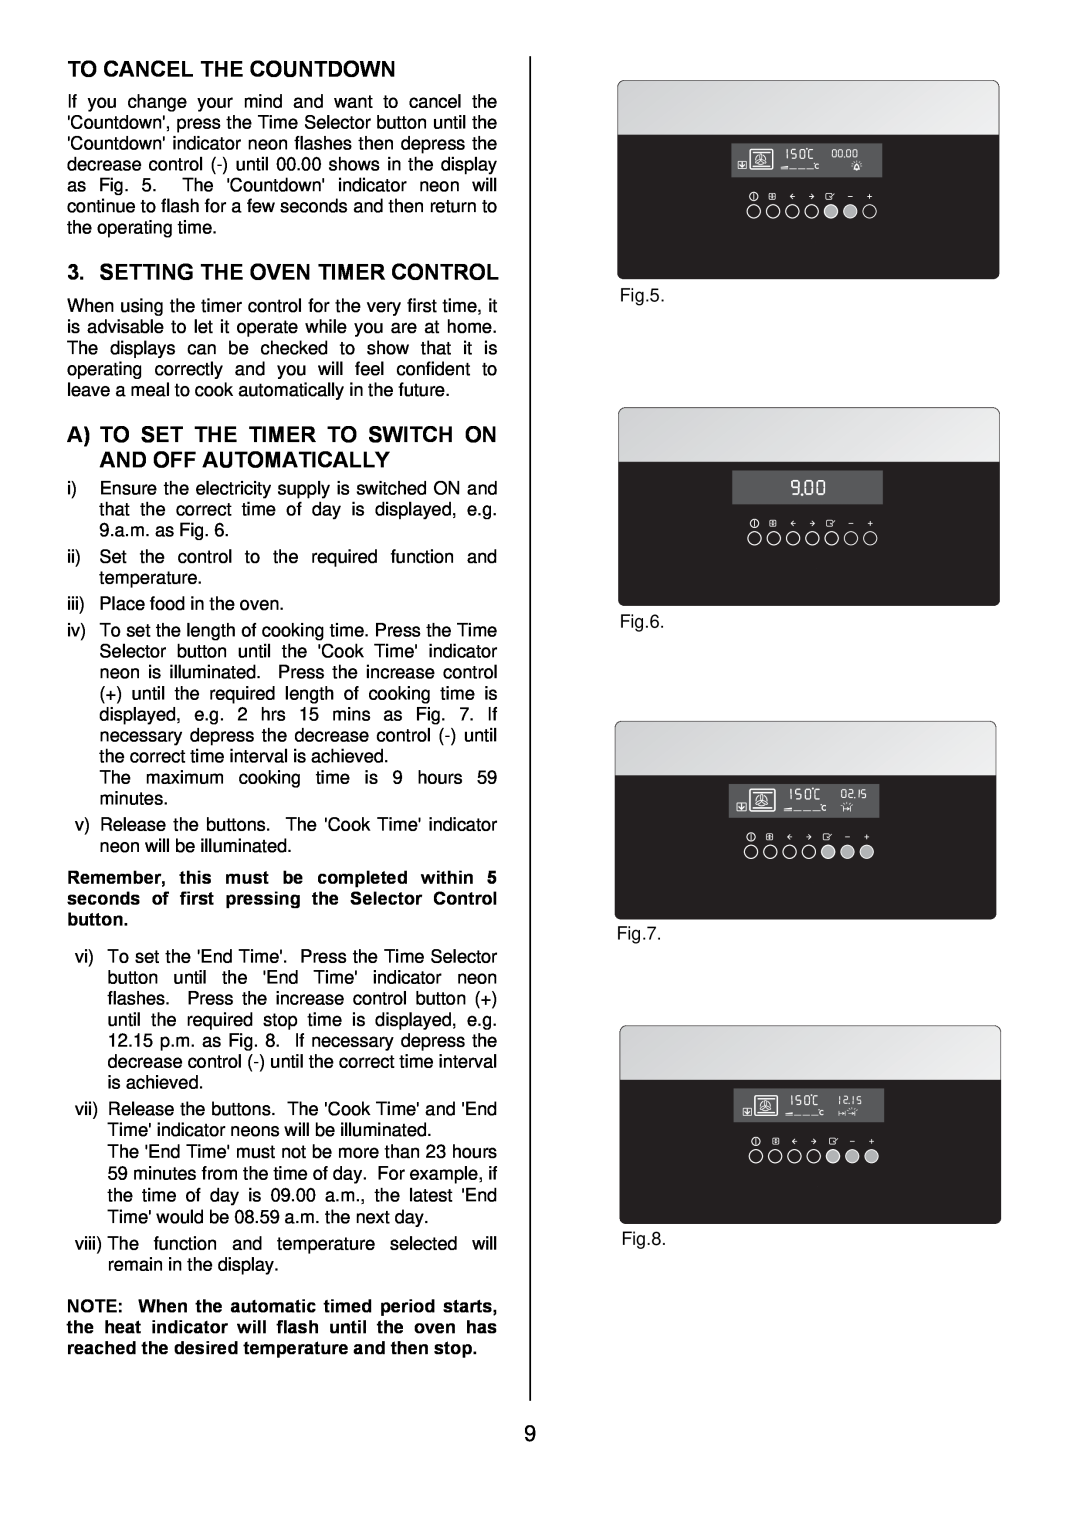 Zanussi ZOD 685 manual To Cancel The Countdown, Setting The Oven Timer Control 